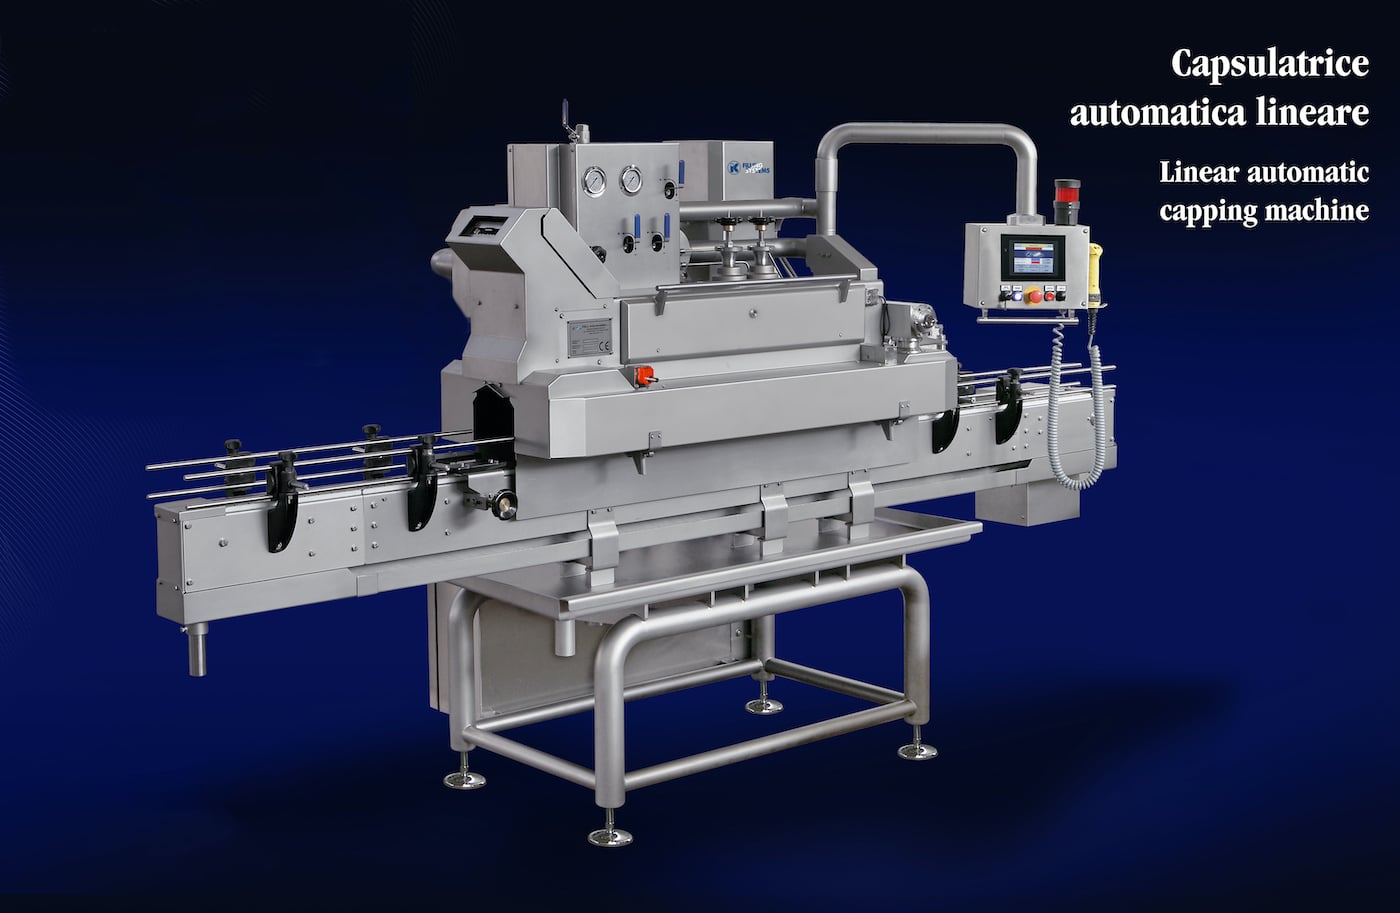 Linear automatic capping machine